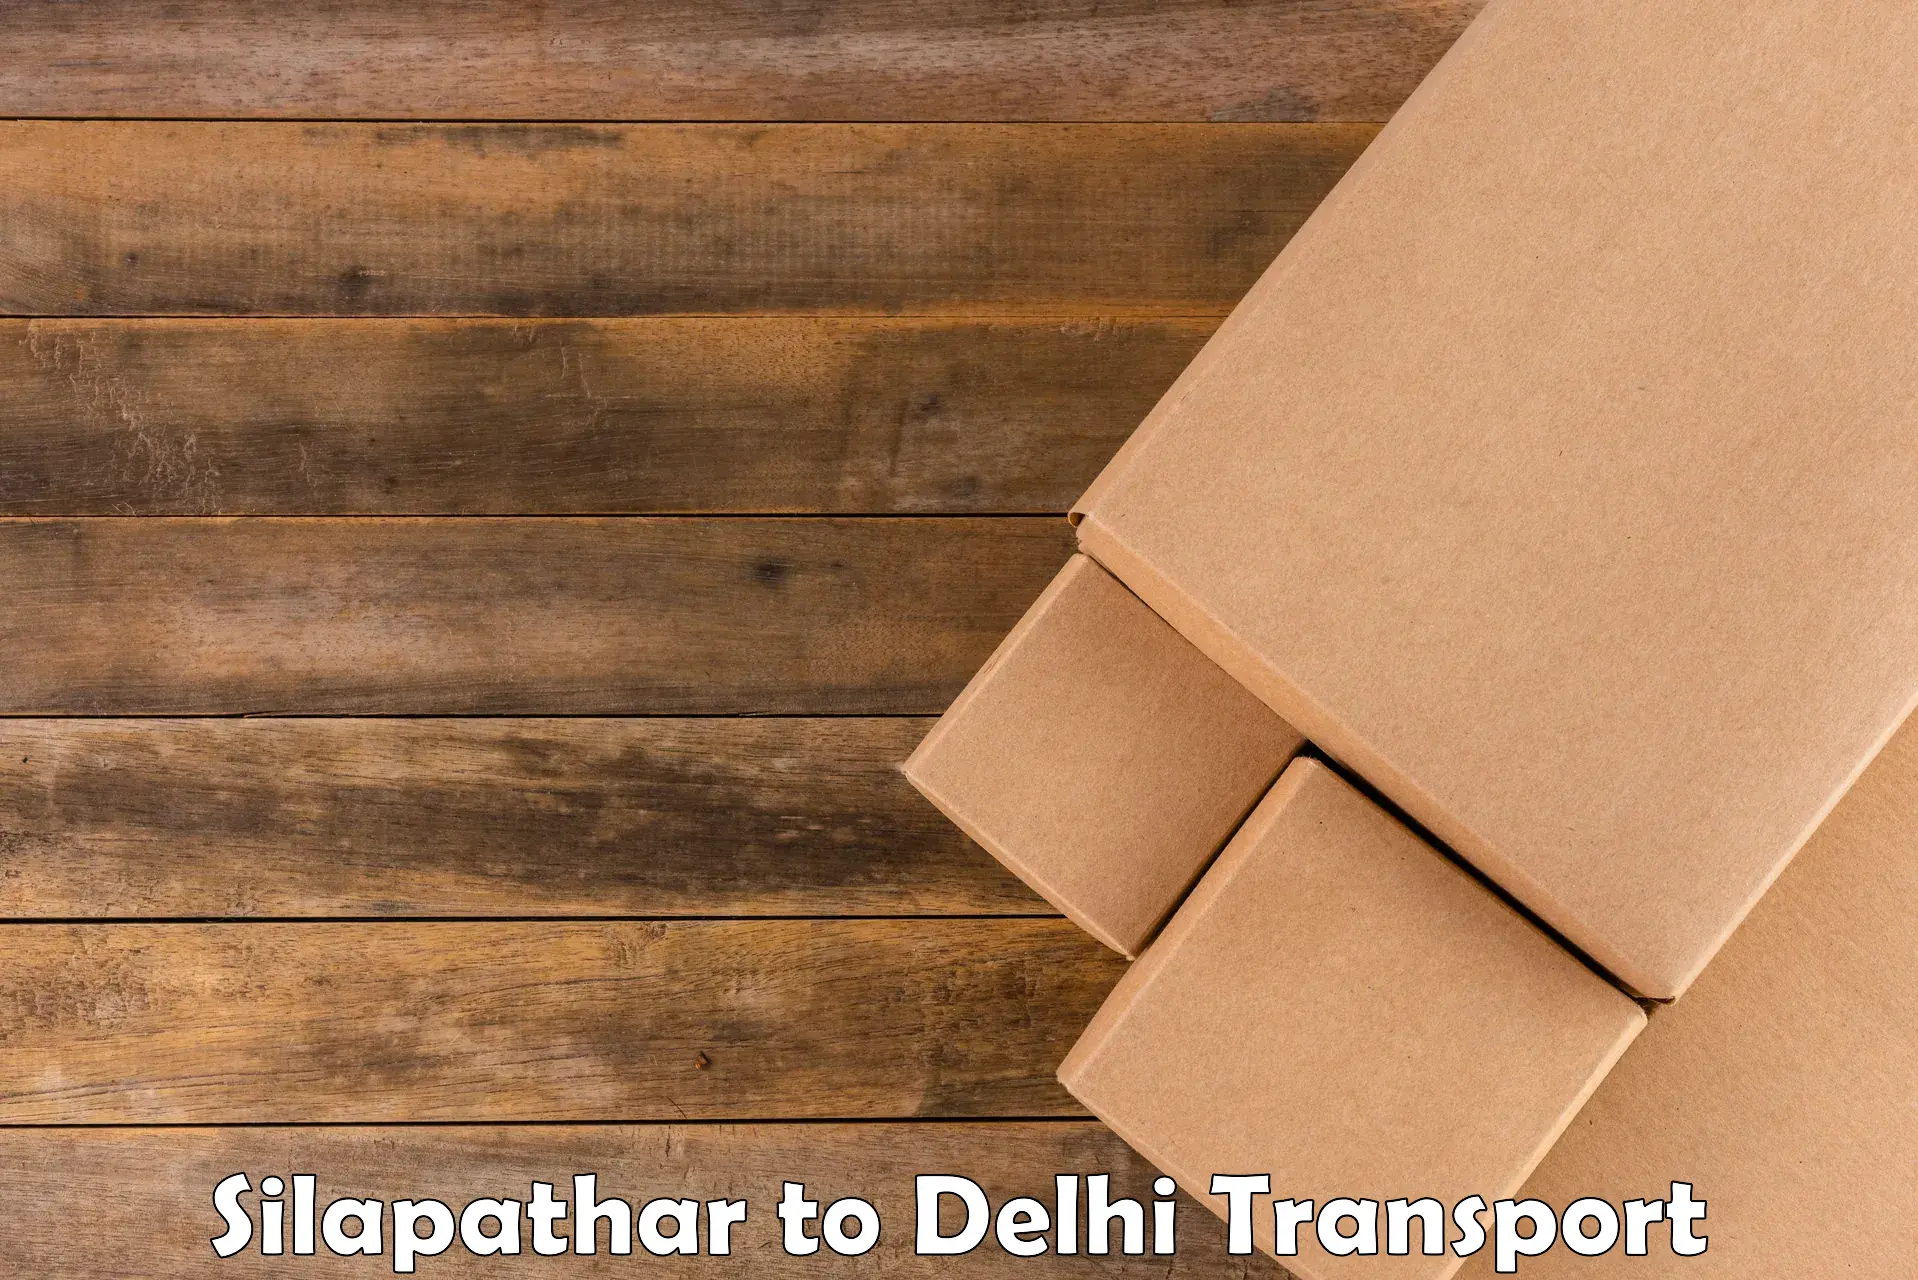 Vehicle transport services Silapathar to East Delhi